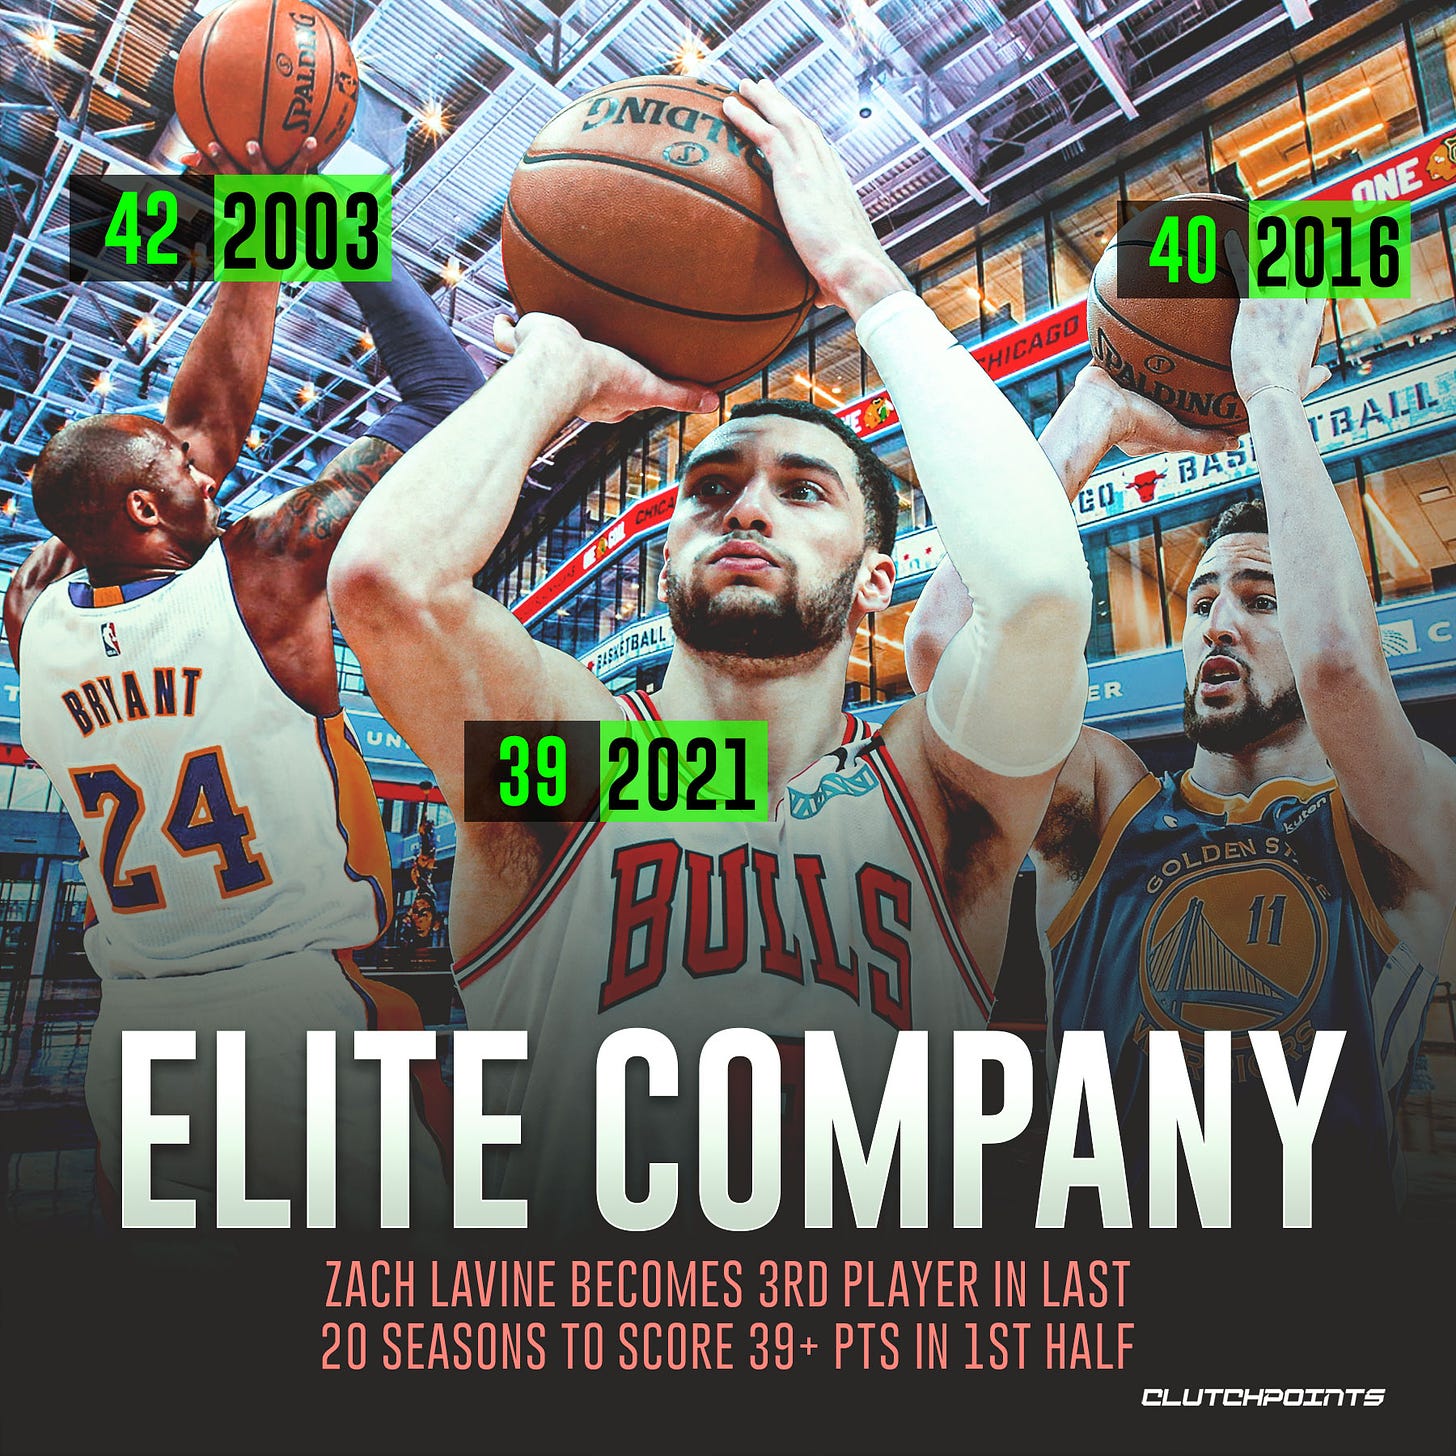 May be an image of 2 people, ball and text that says 'gNIC S 42 2003 ΟΝΕ 40 2016 HICAGO BASI ሮ[ BALL BRYANT 24 39 2021 BULLS ELITE COMPANY ZACH LAVINE BECOMES 3RDPLAYER PLAYER IN LAST 20 SEASONS TO SCORE39+ PTS 1ST HALF CLUTCHPOINTS'